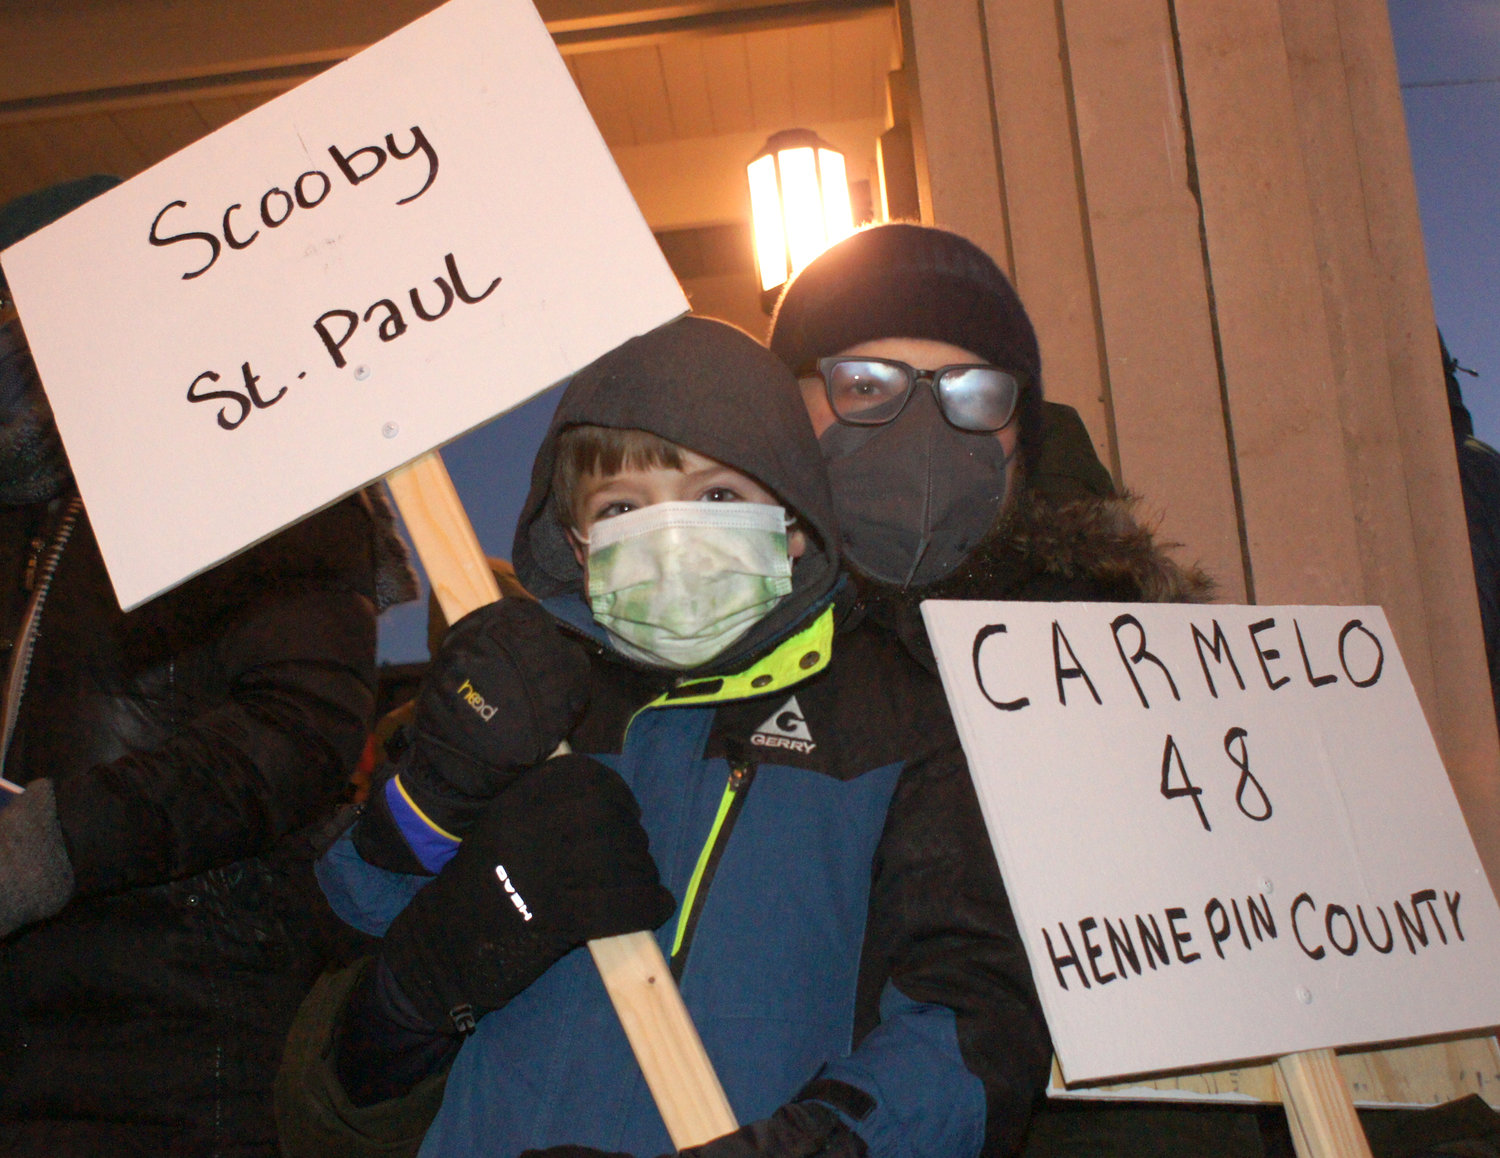 Ivan Ludmer and his son, Lewis, felt compelled to march in support of efforts to house the homeless.